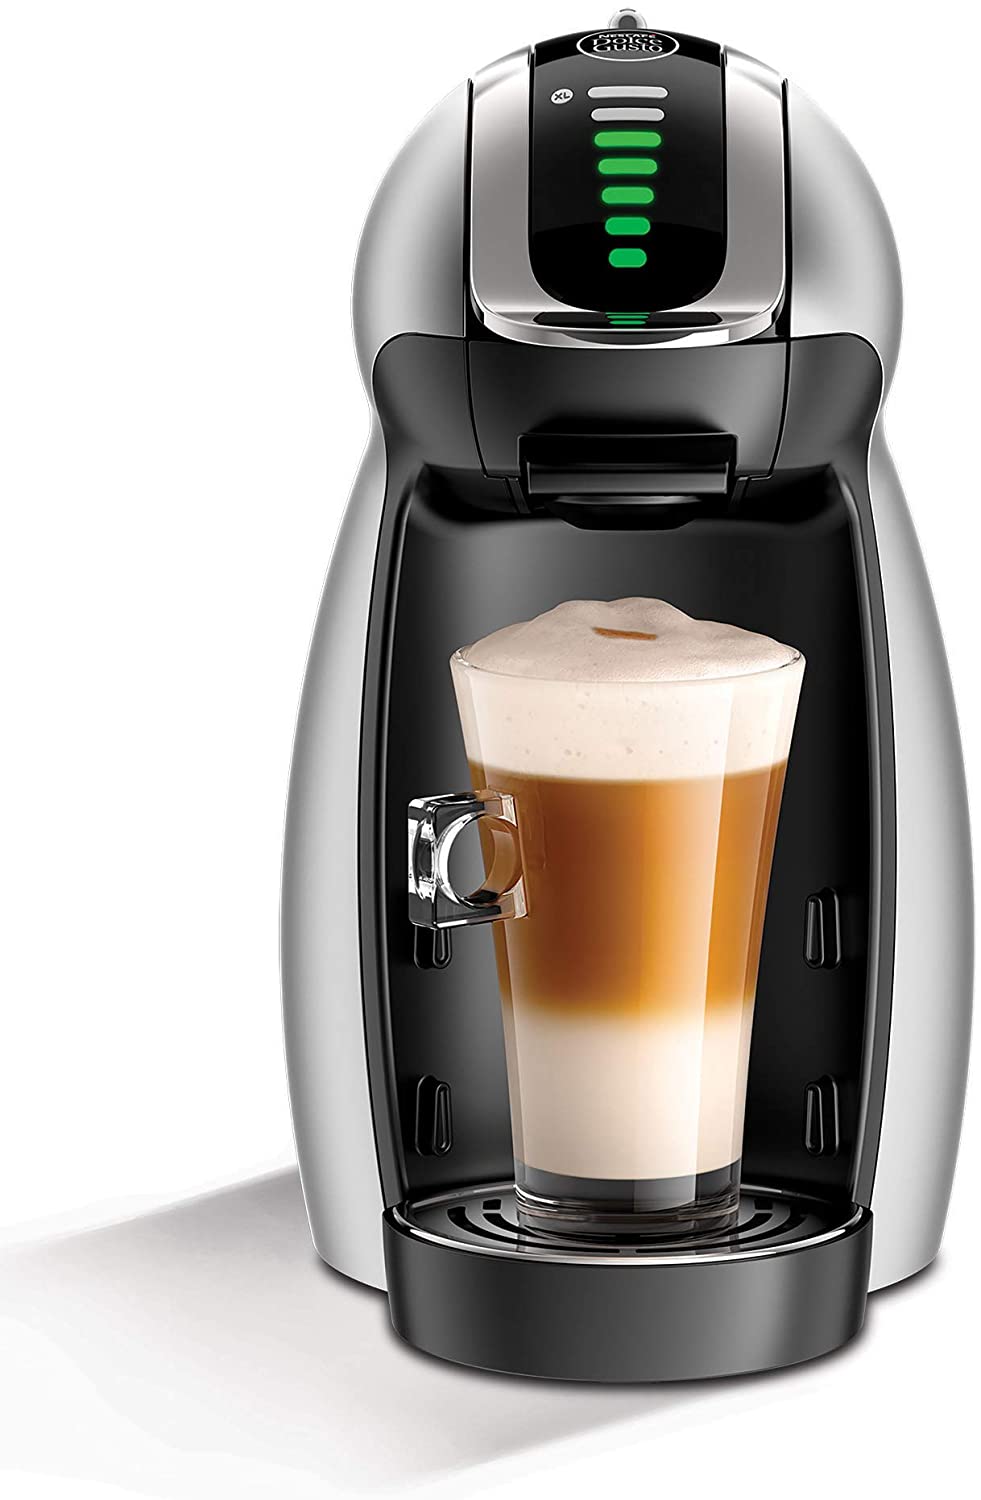  4. Dolce Gusto automatic coffee machine 